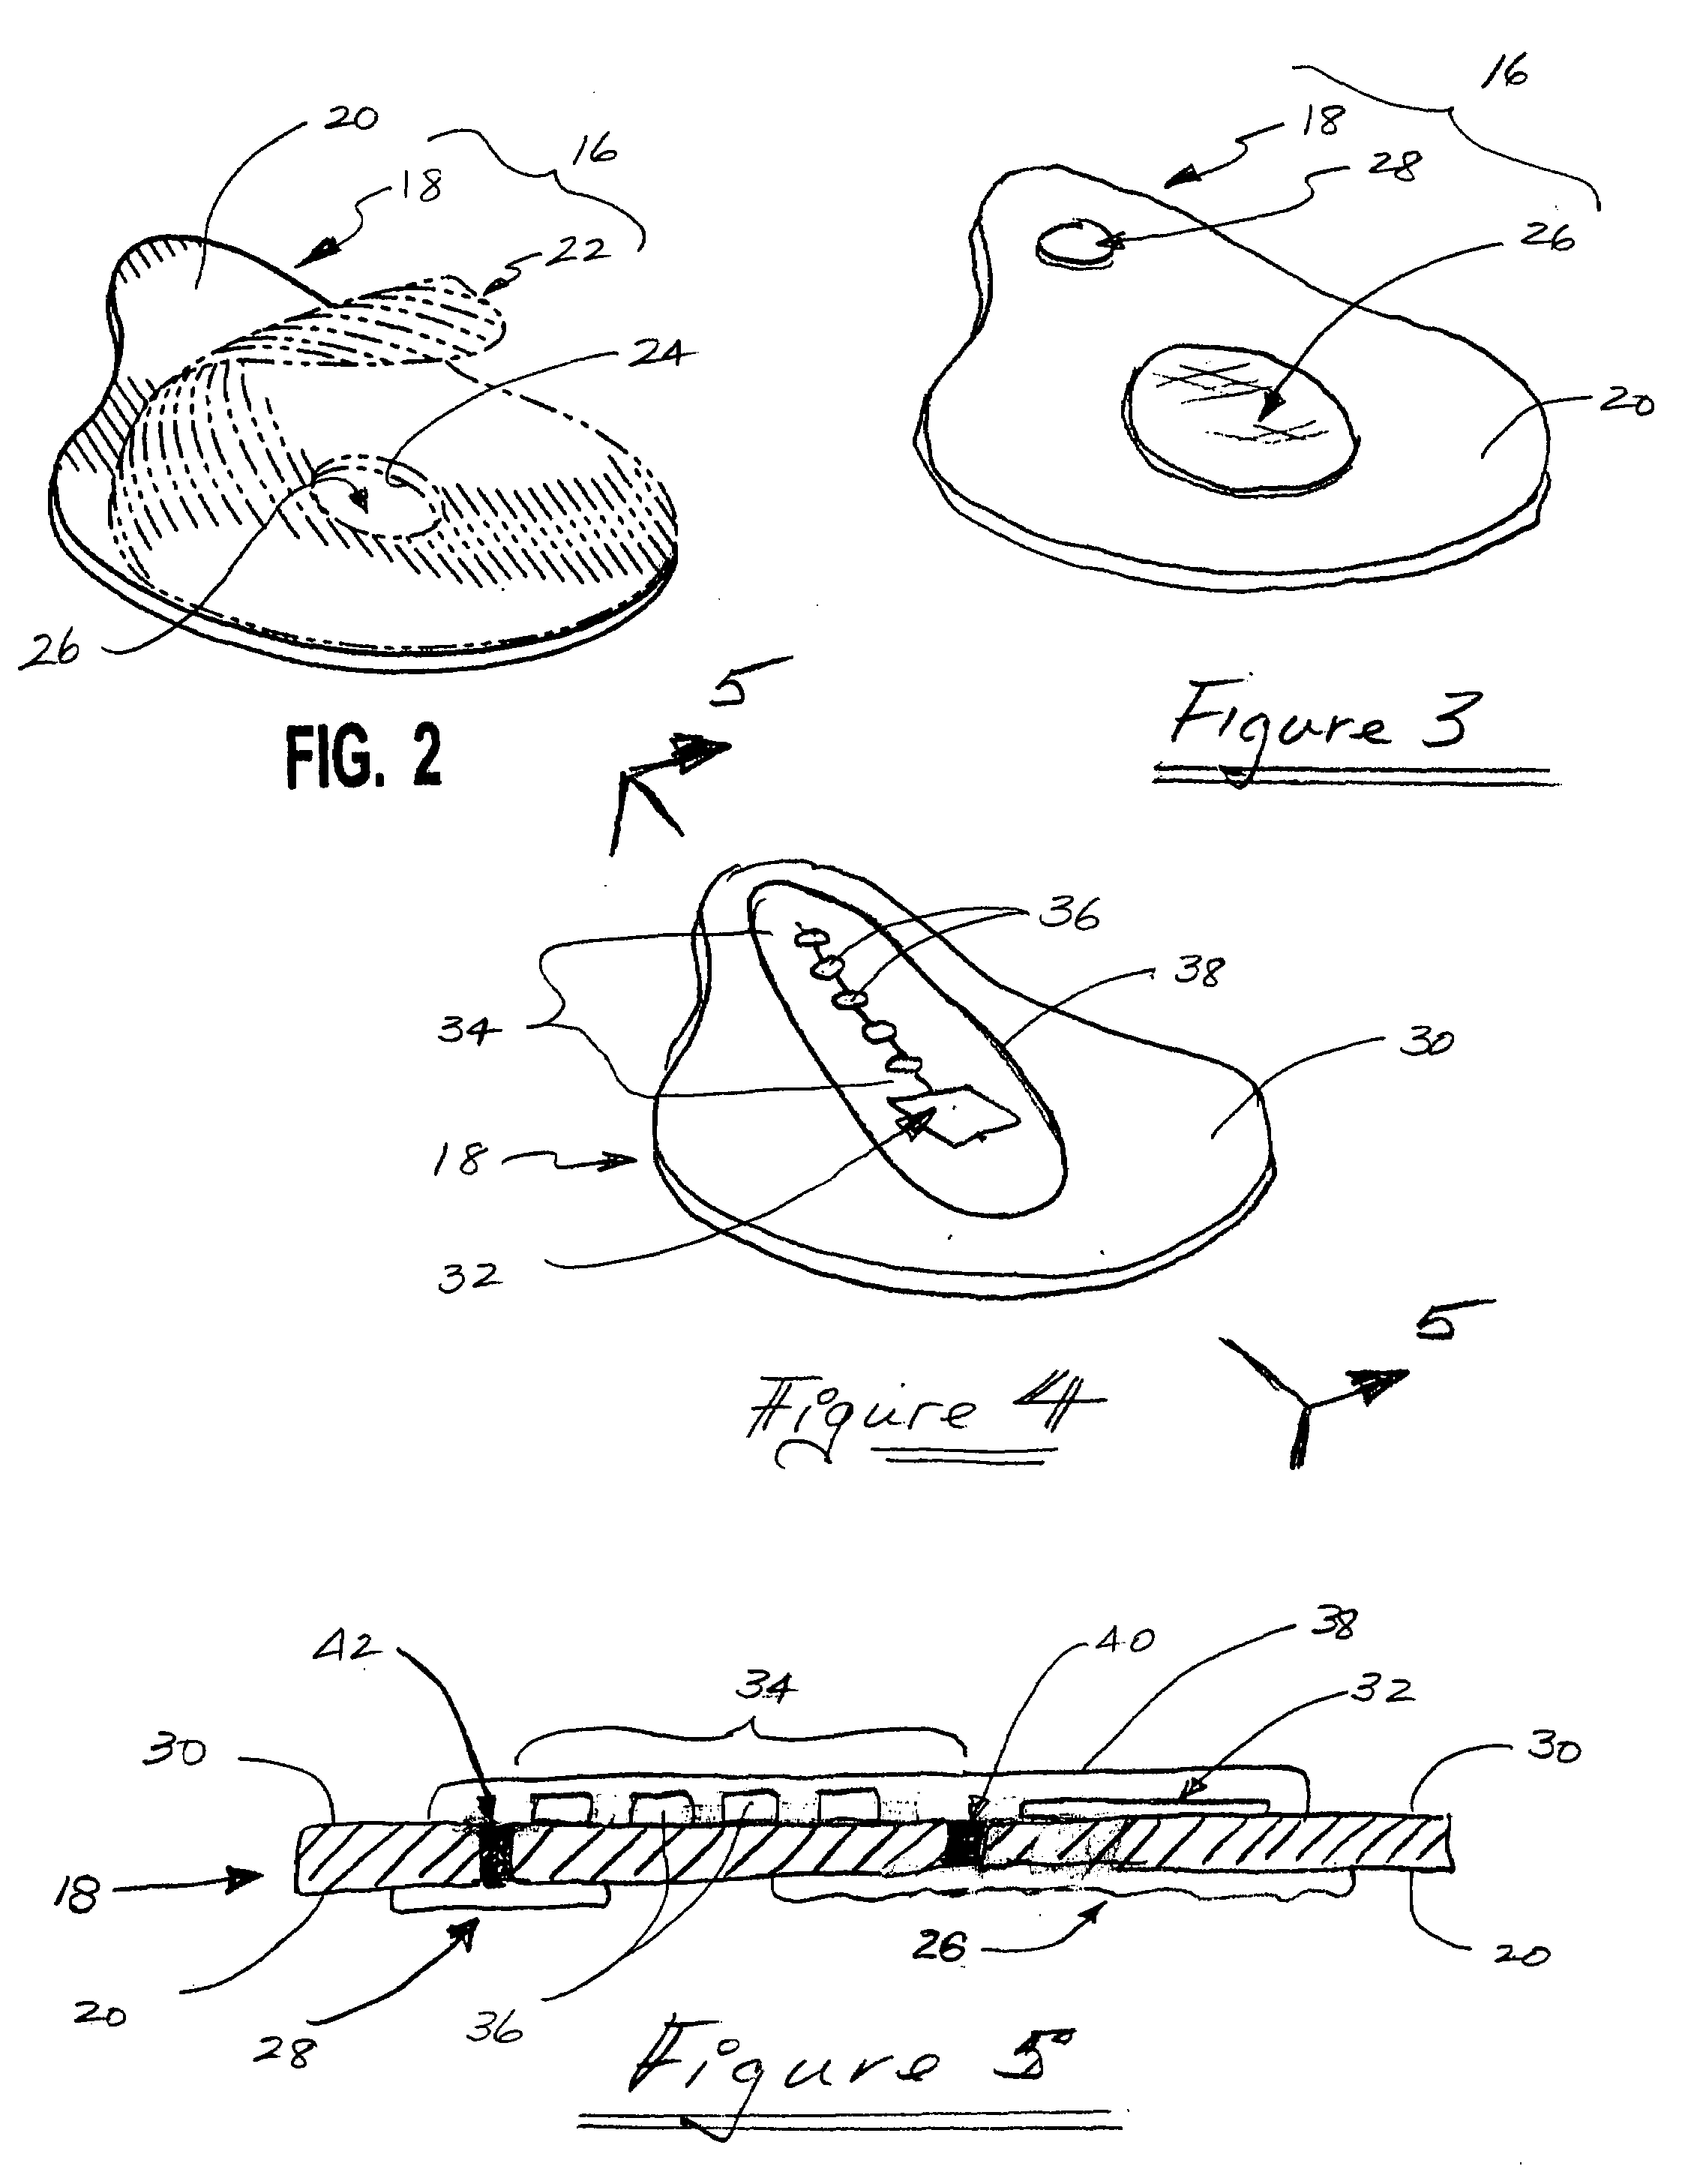 Active iontophoresis delivery system